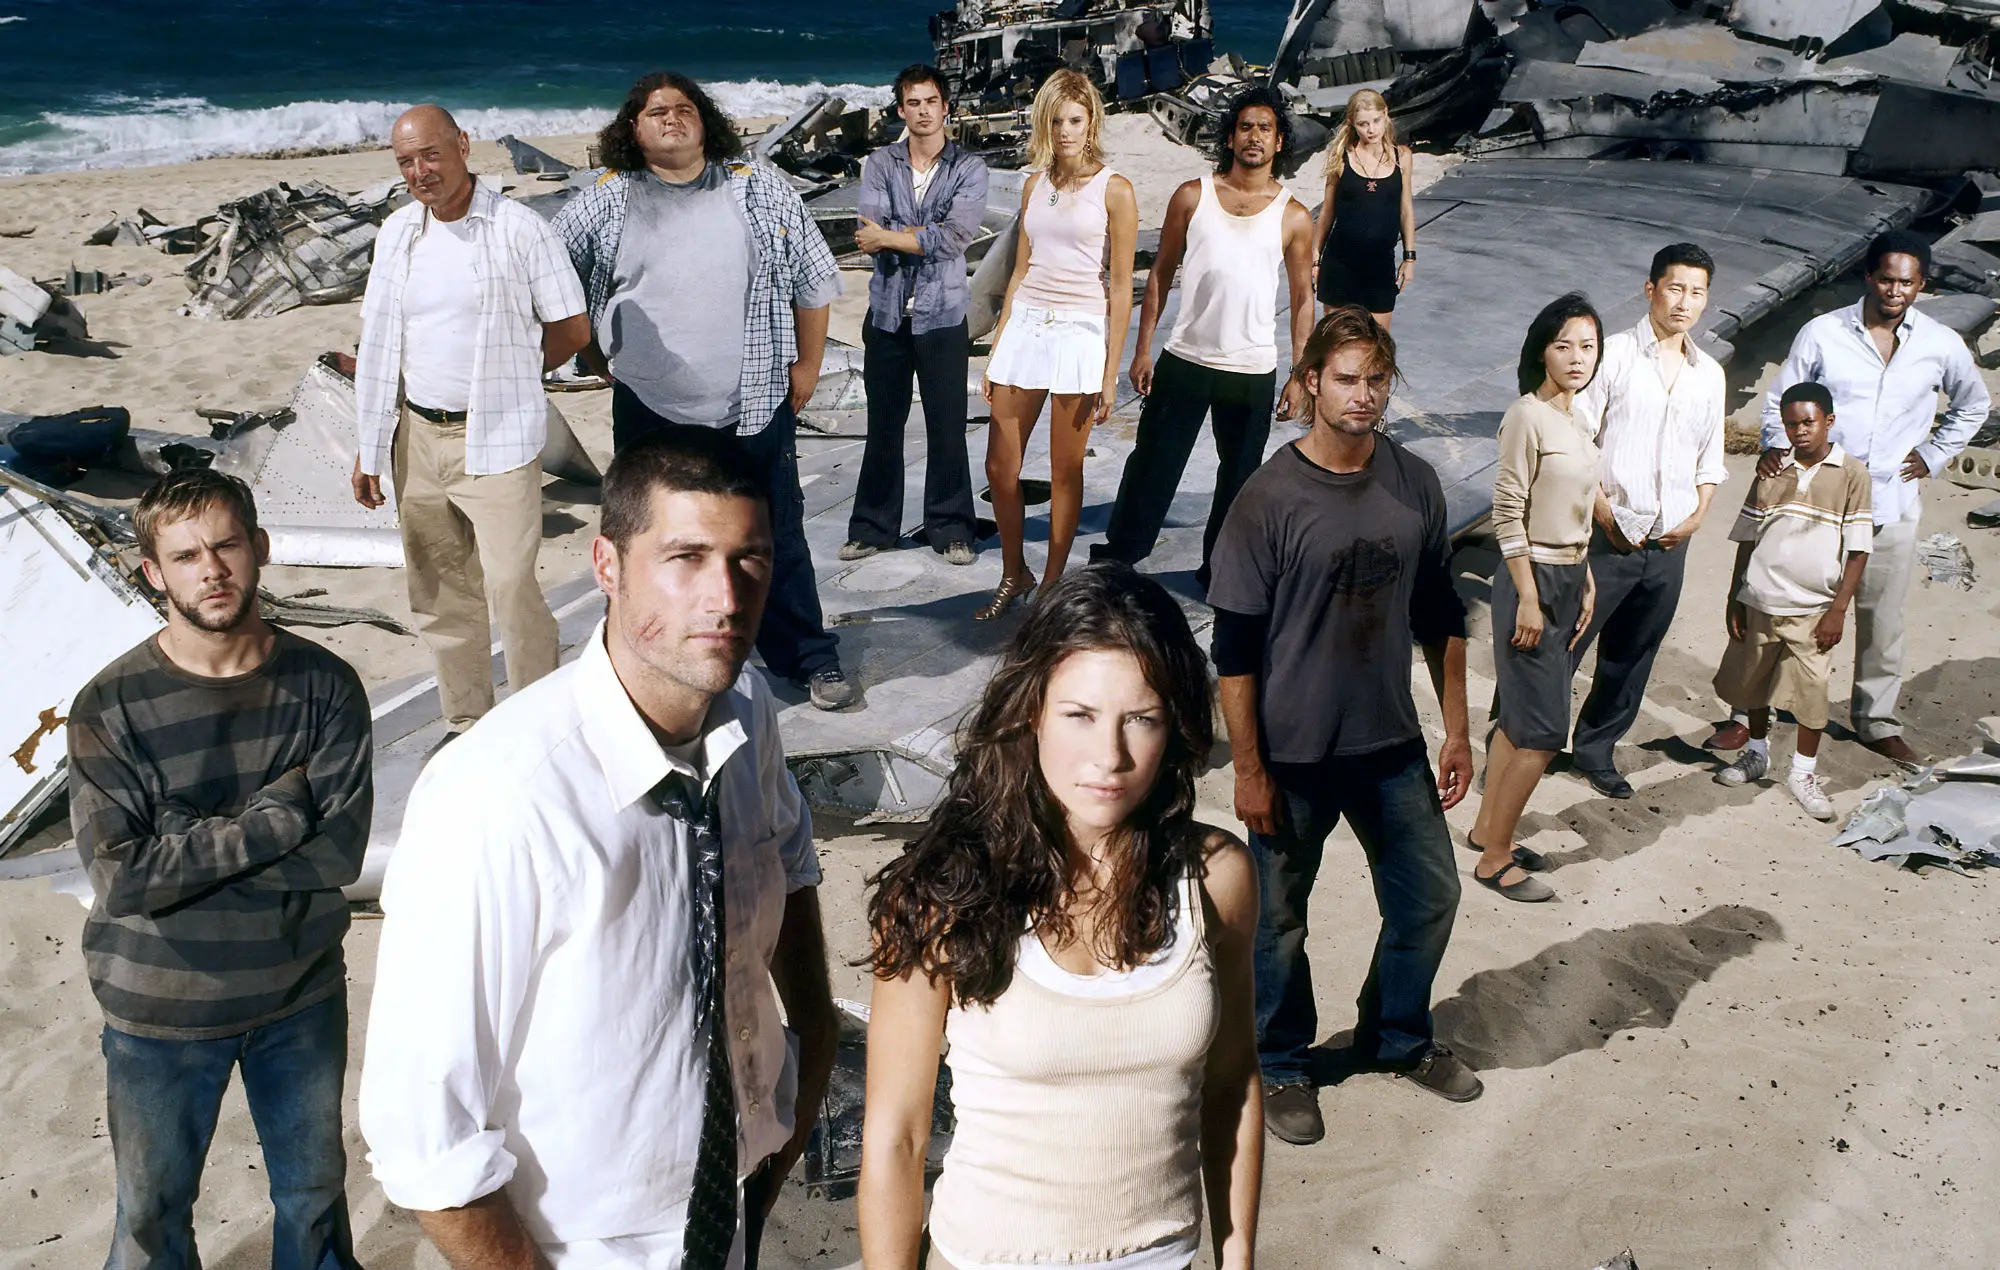 As you can see, the ABC series "Lost" had a large cast.